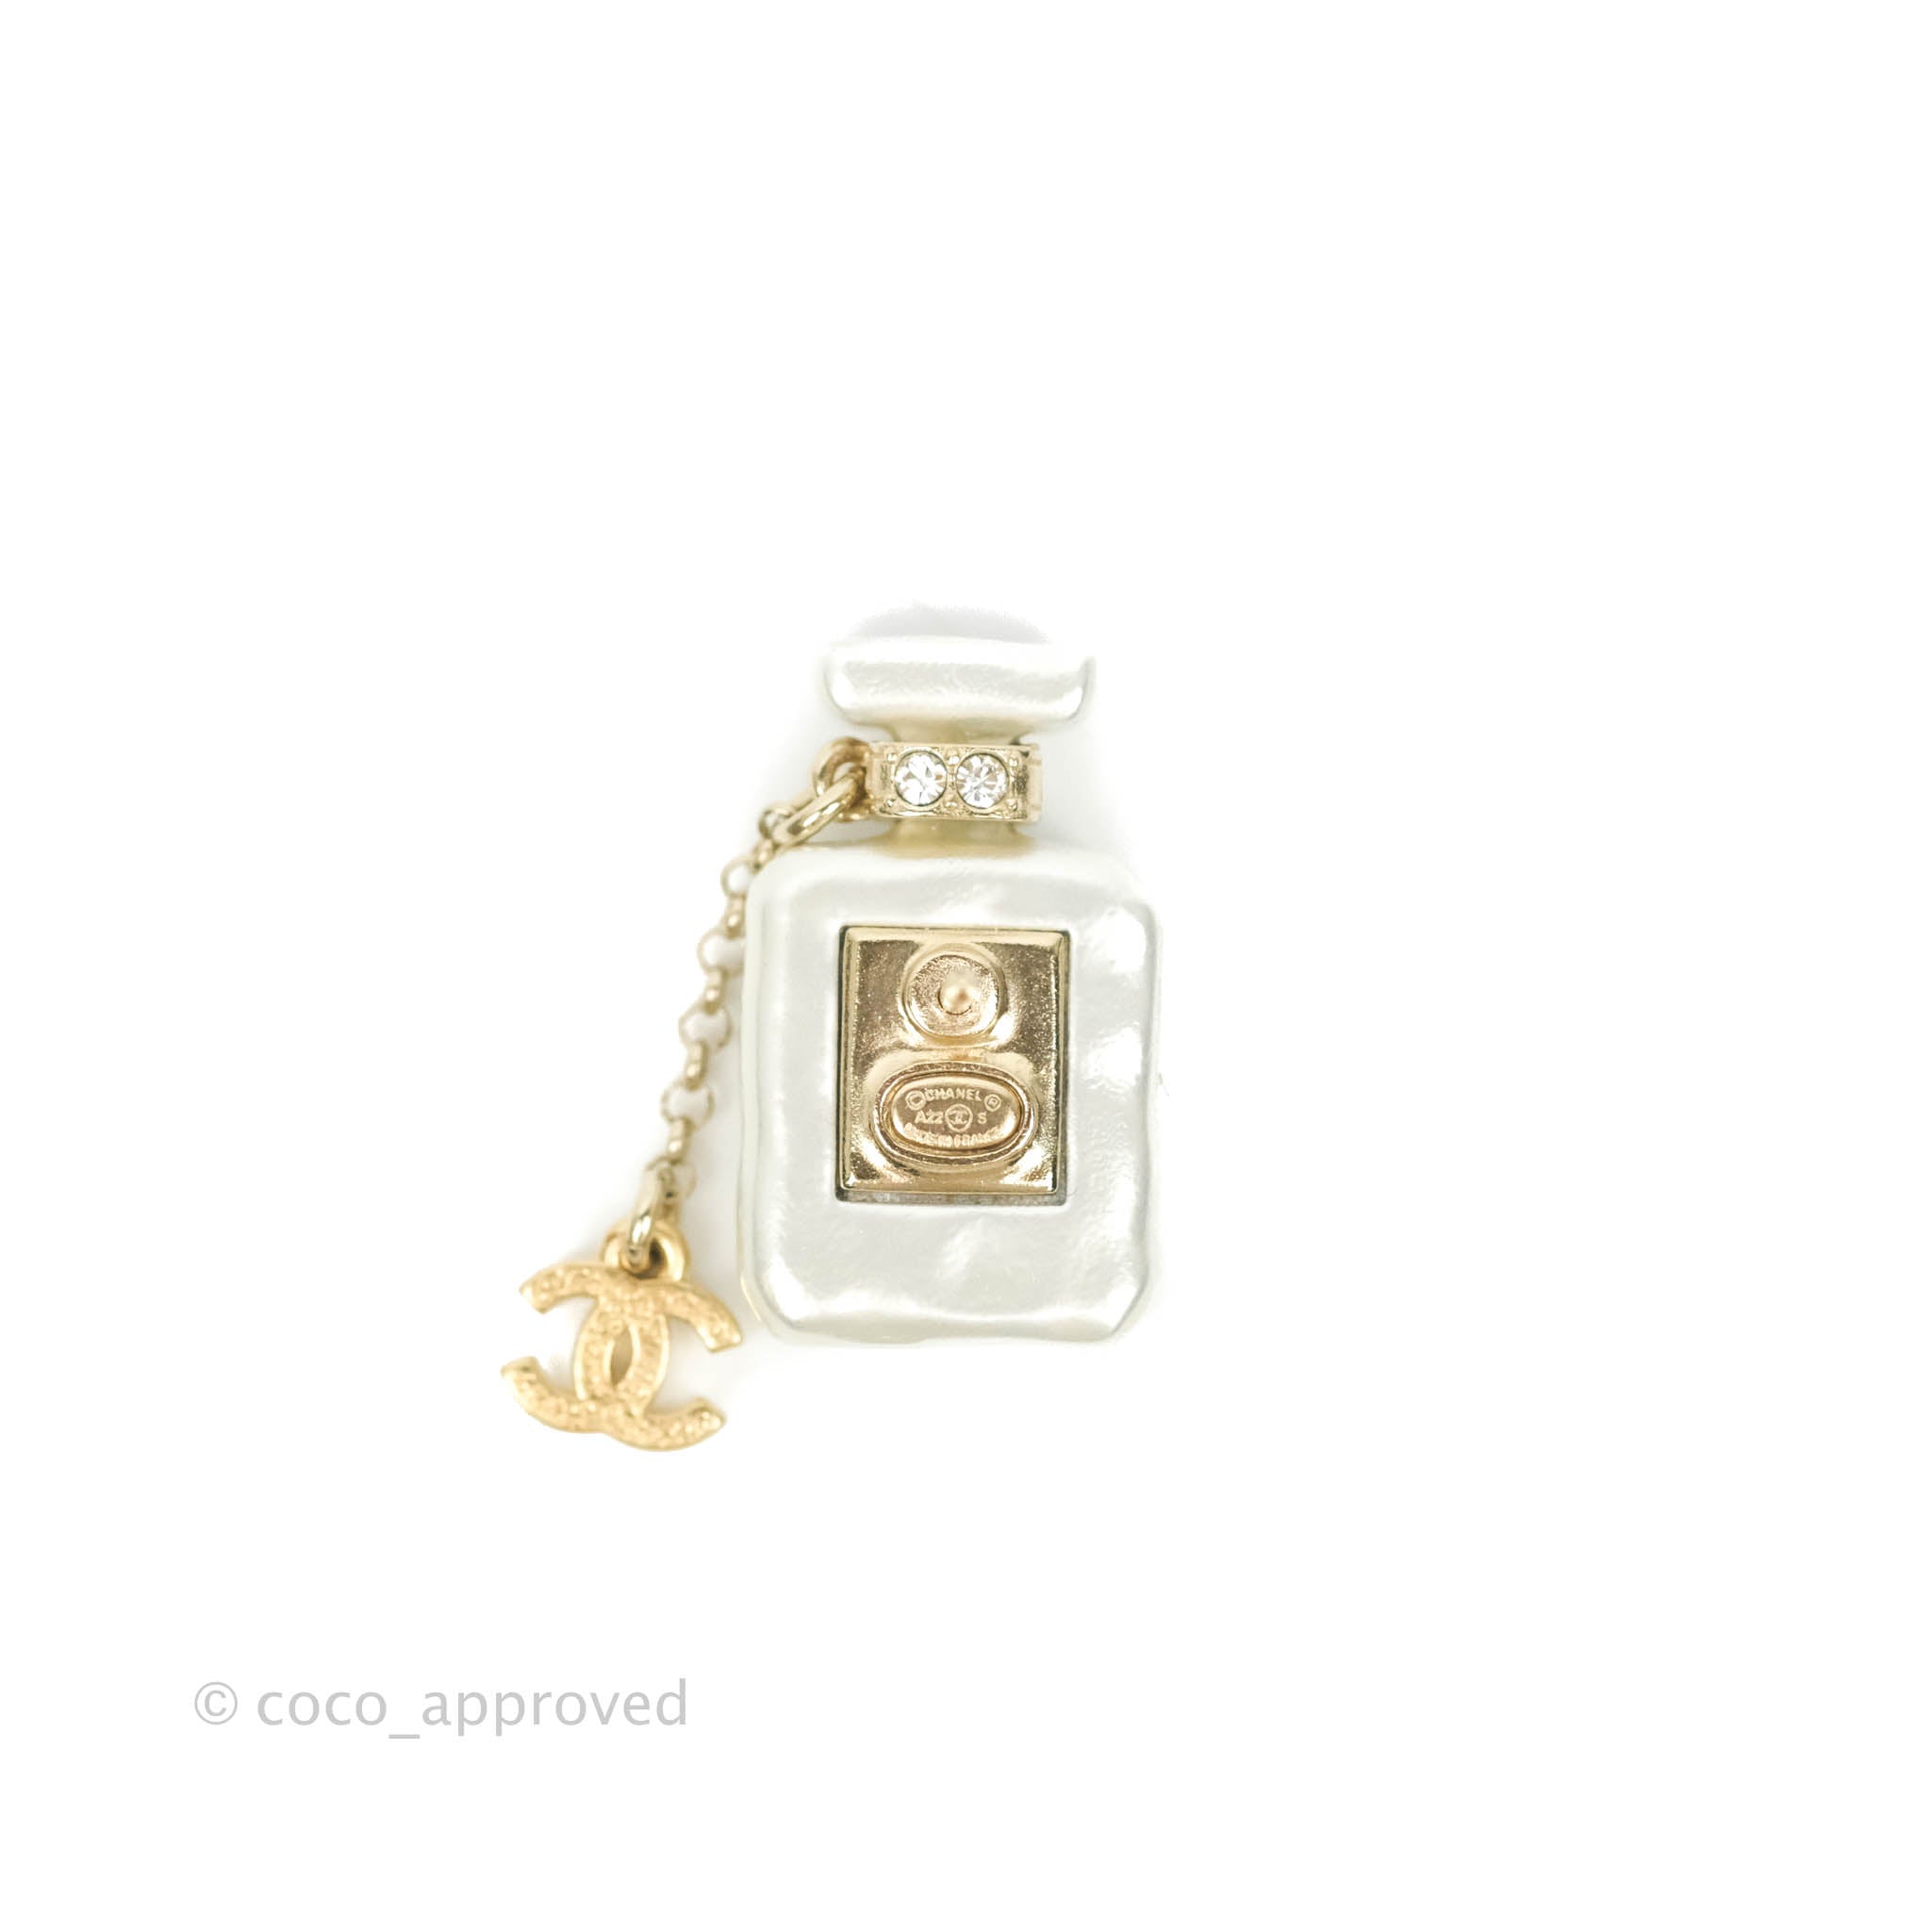 Chanel No5 Perfume Bottle Pearl Pin Brooch Gold Tone 22S – Coco